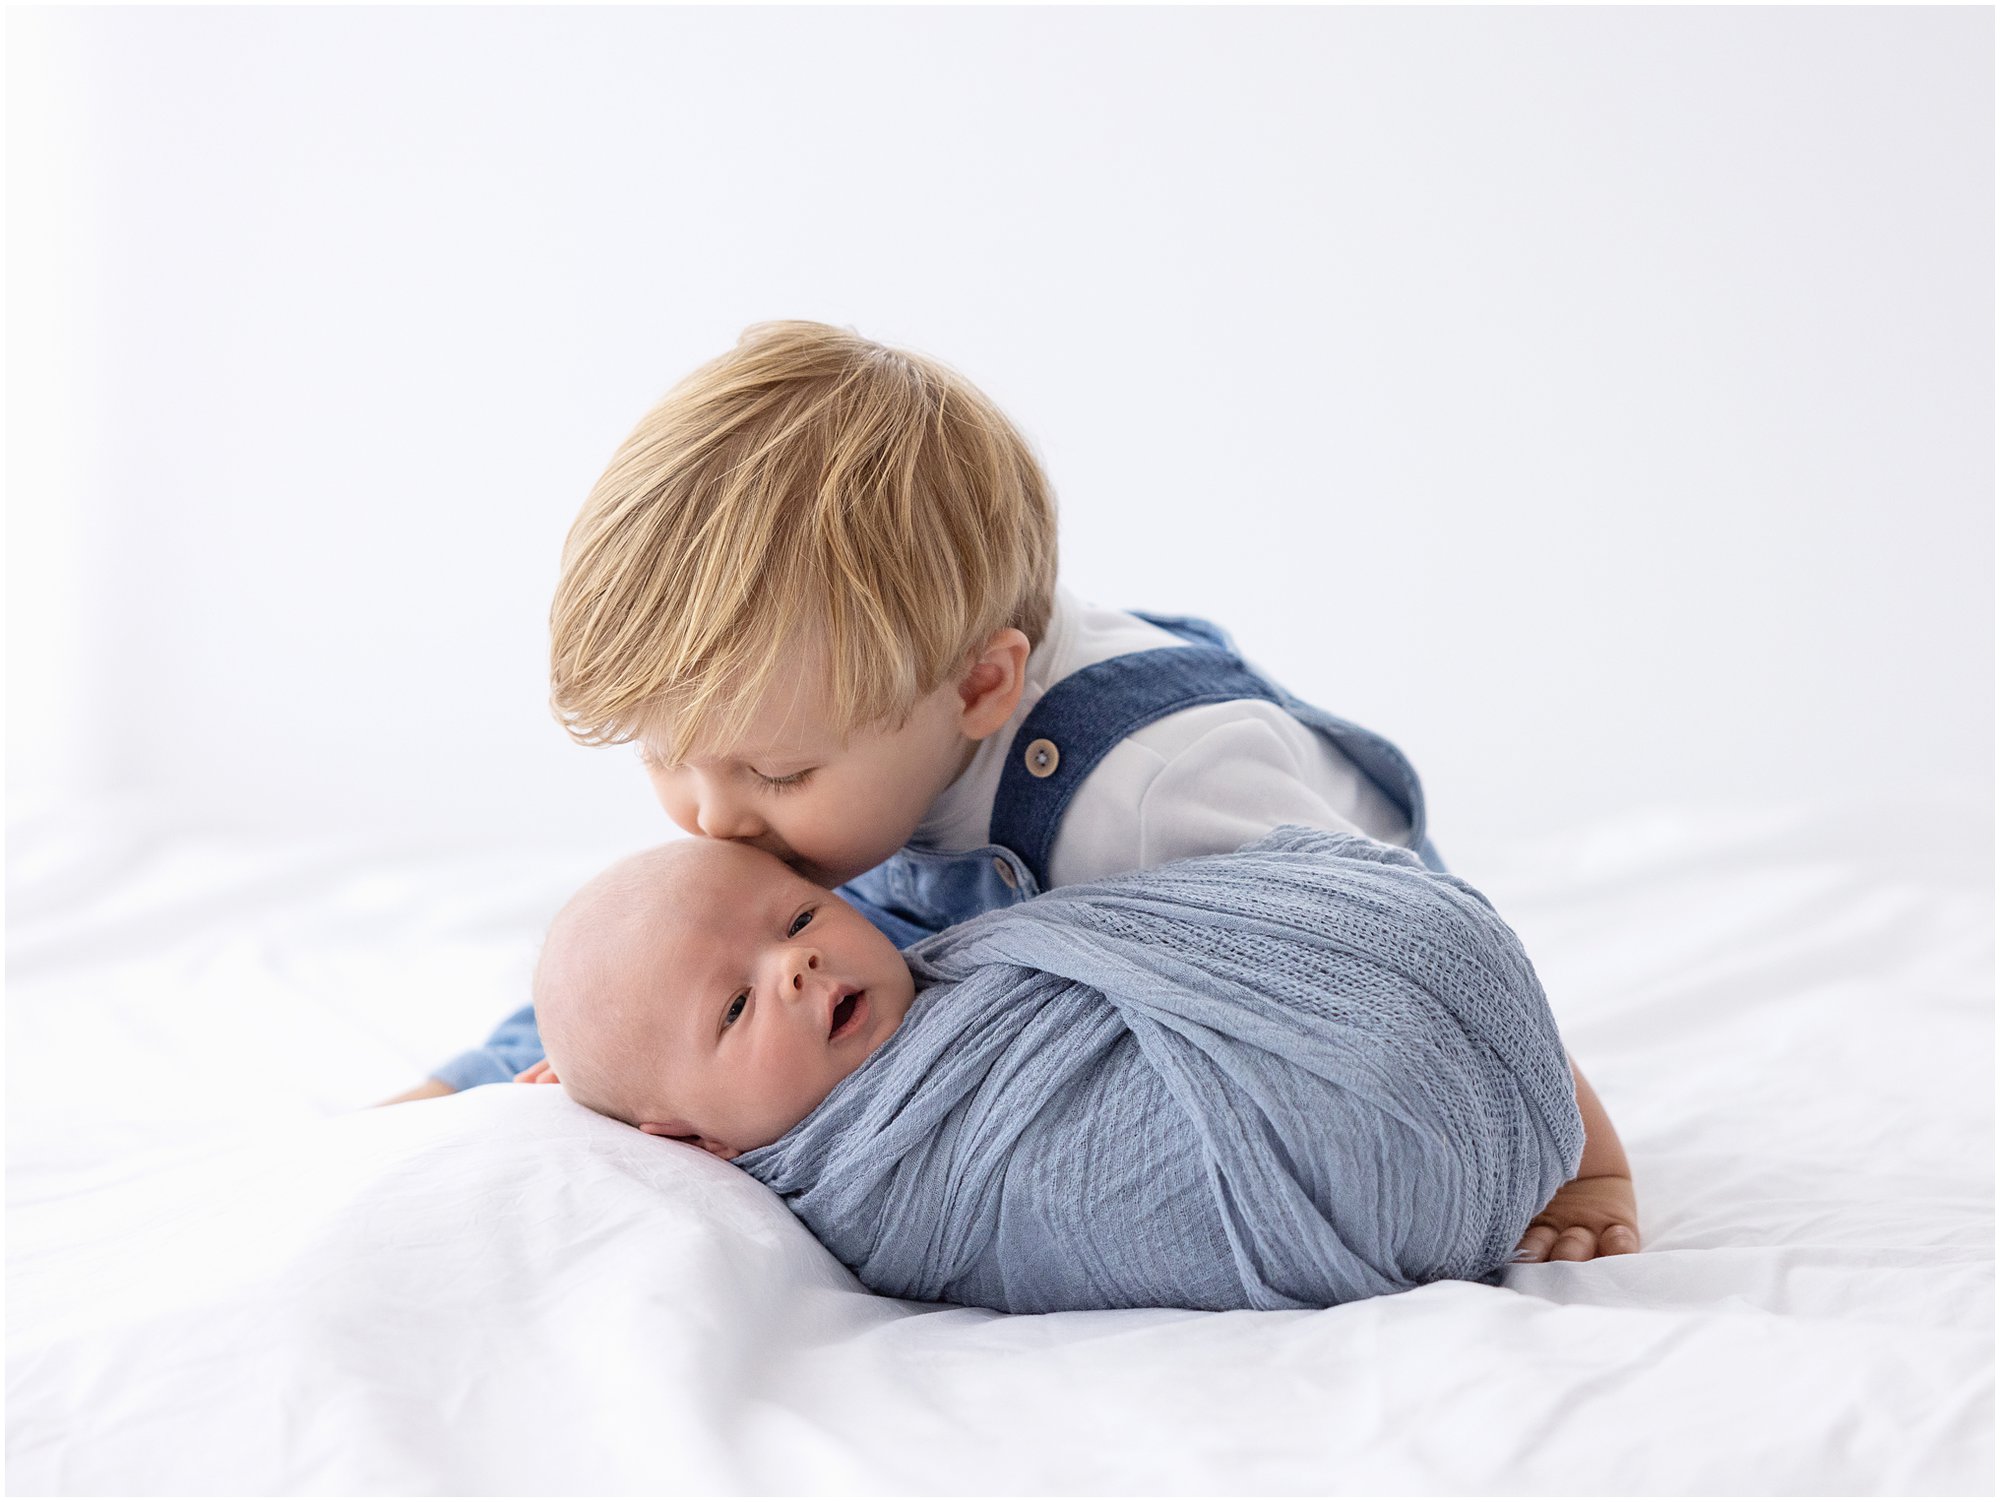 Toddler kisses his newborn Baby Brother during a Newborn Photoshoot with Alison McKenny Photography